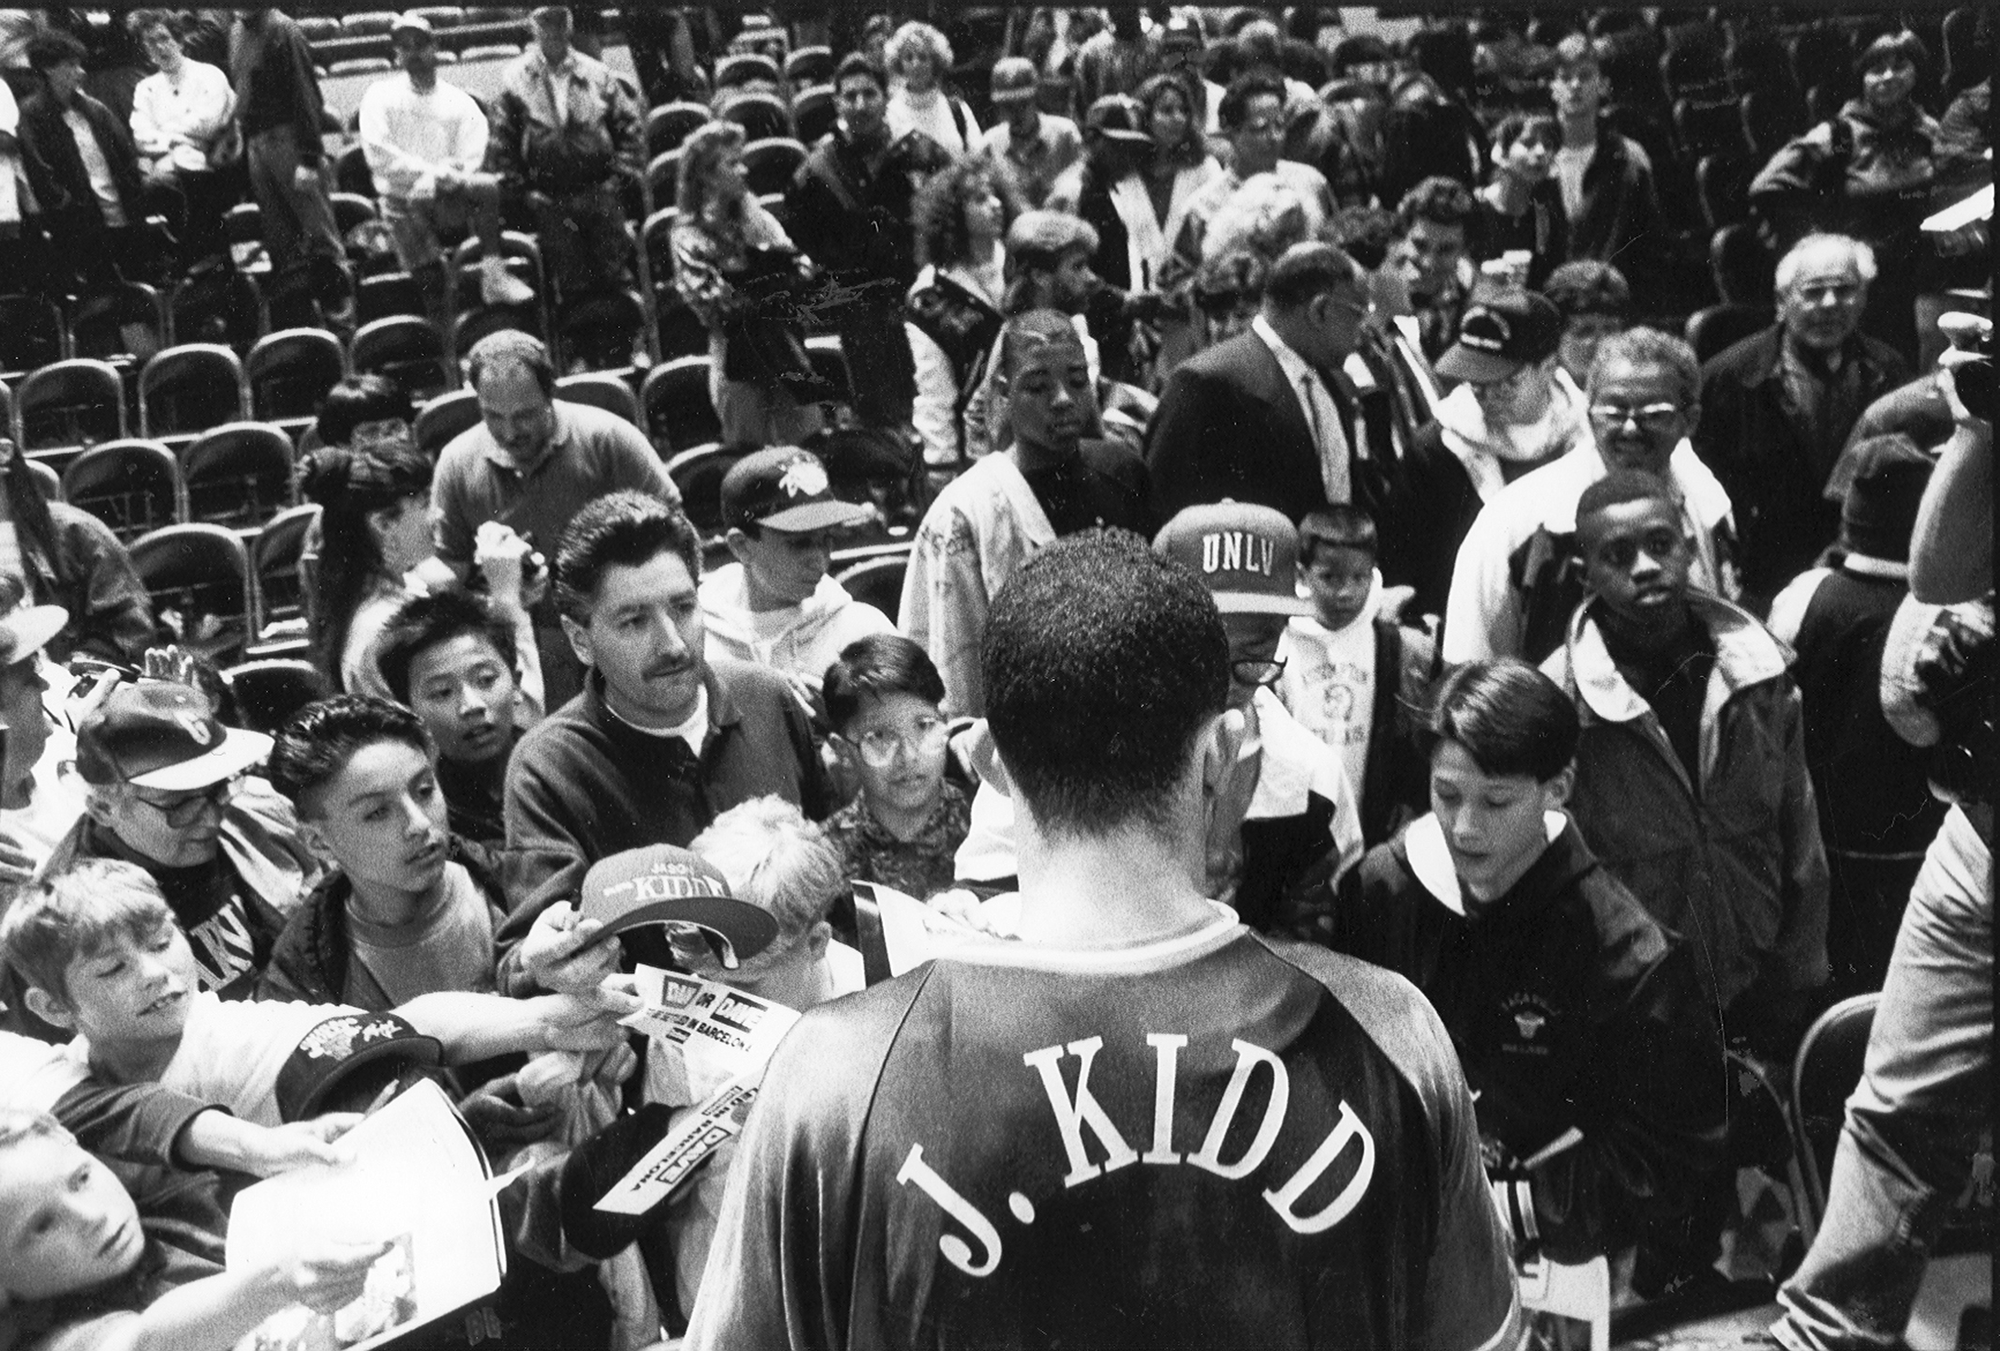 Jason Kidd signs autographs in 1992